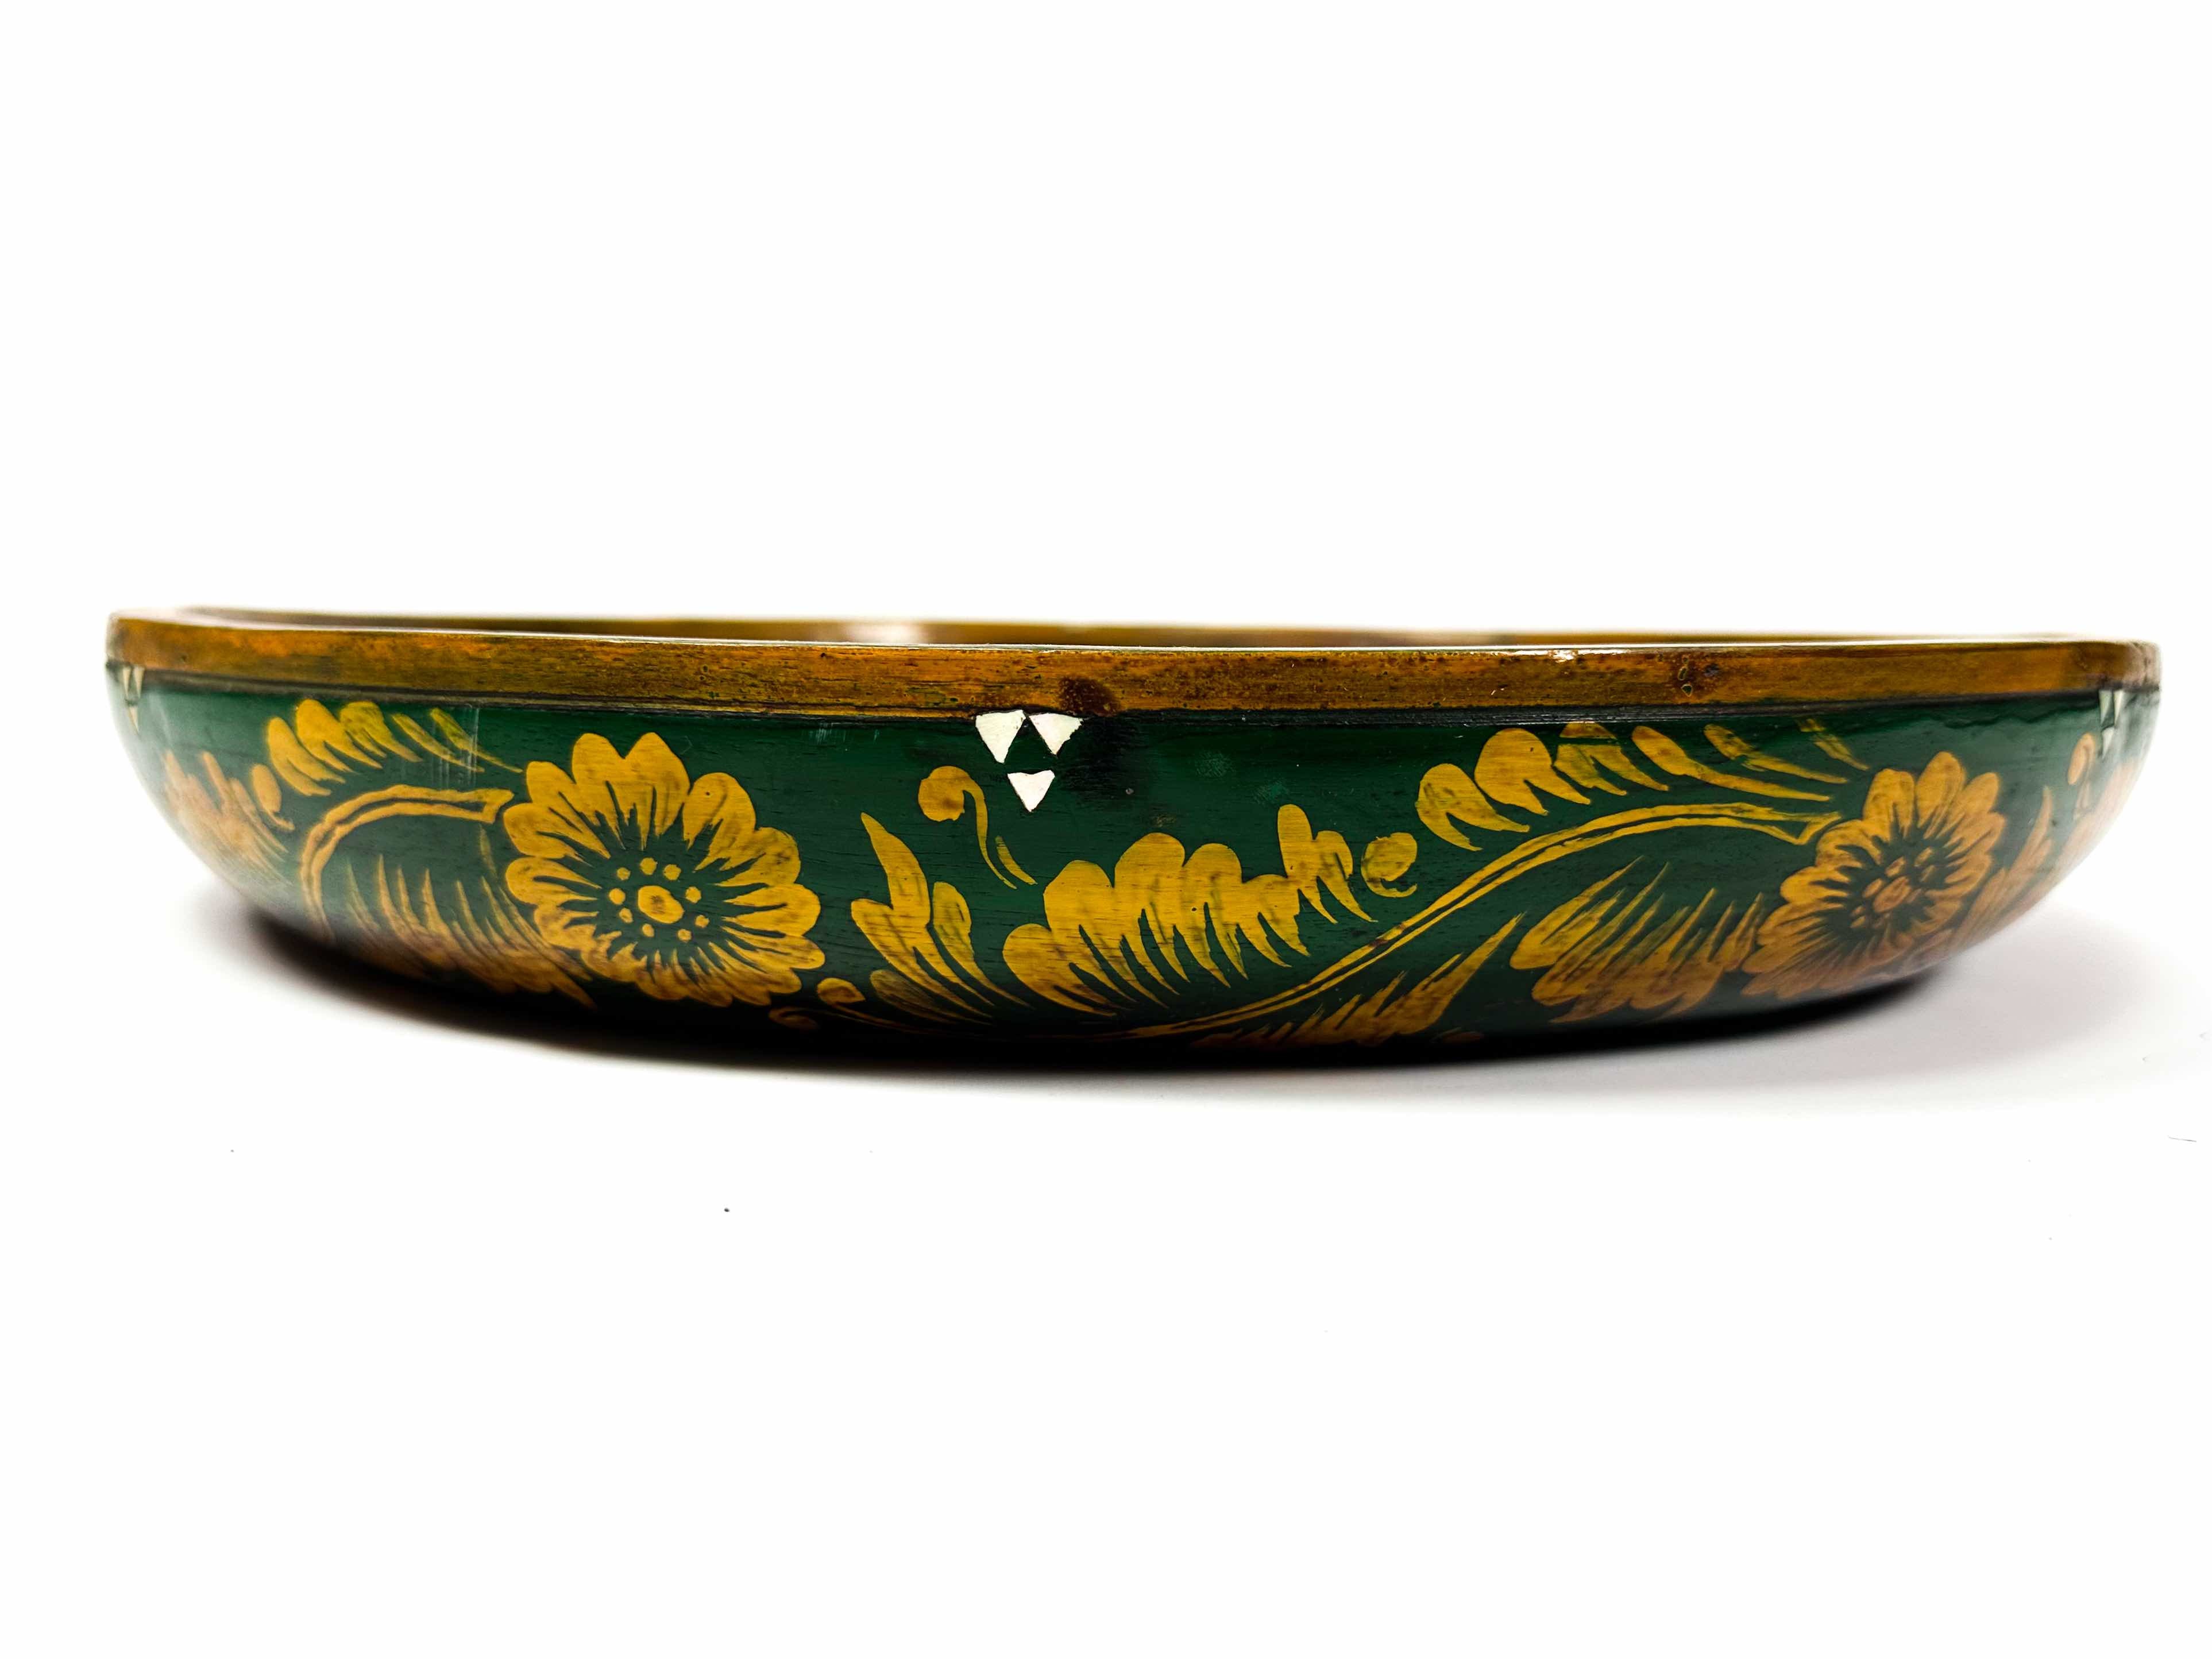 Lombok wooden bowl with shell inlay